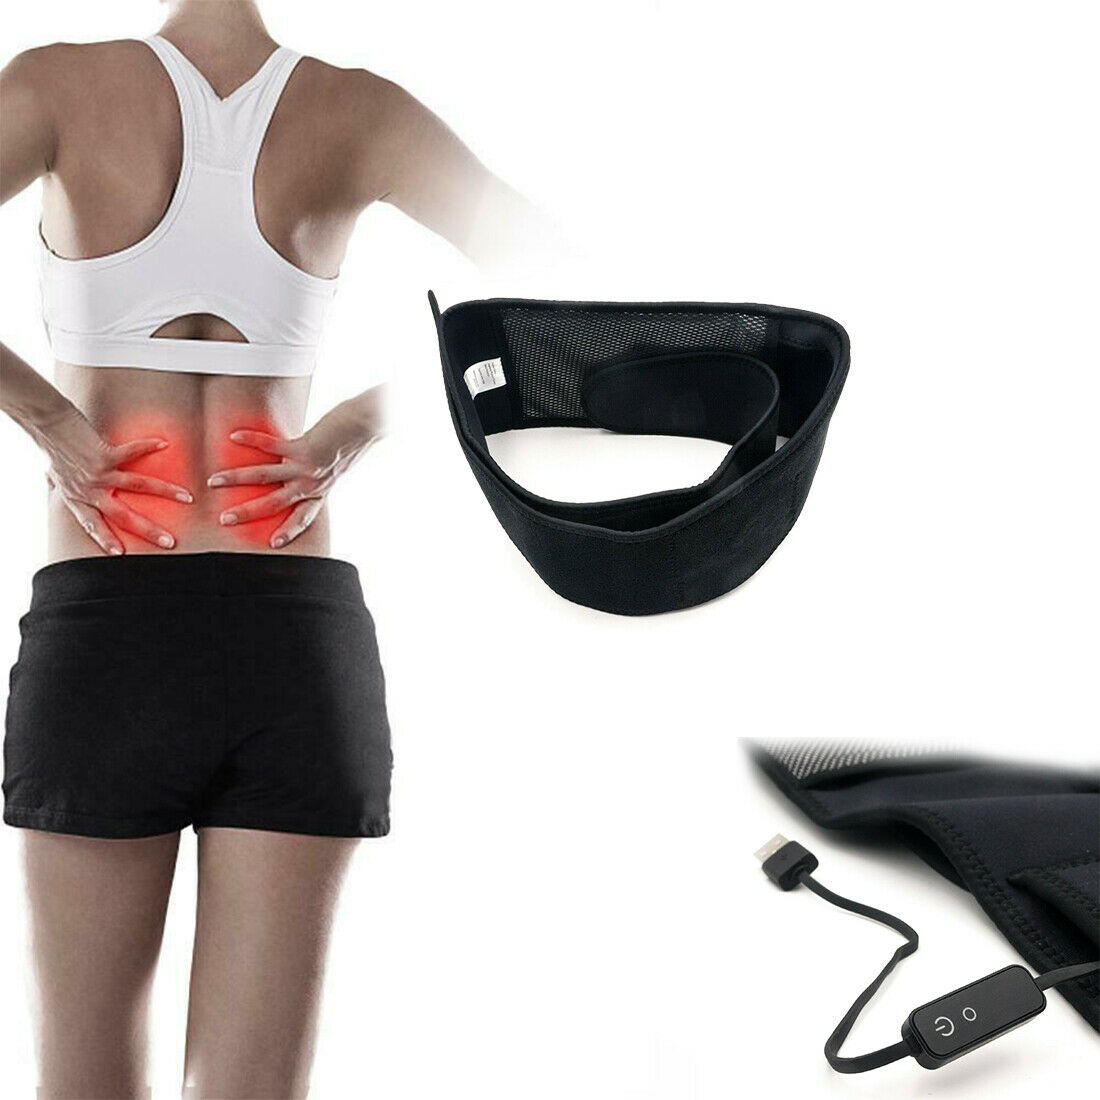 Cirago Graphene Far Infrared Heating Waist Belt for Back Pain Relief Therapy